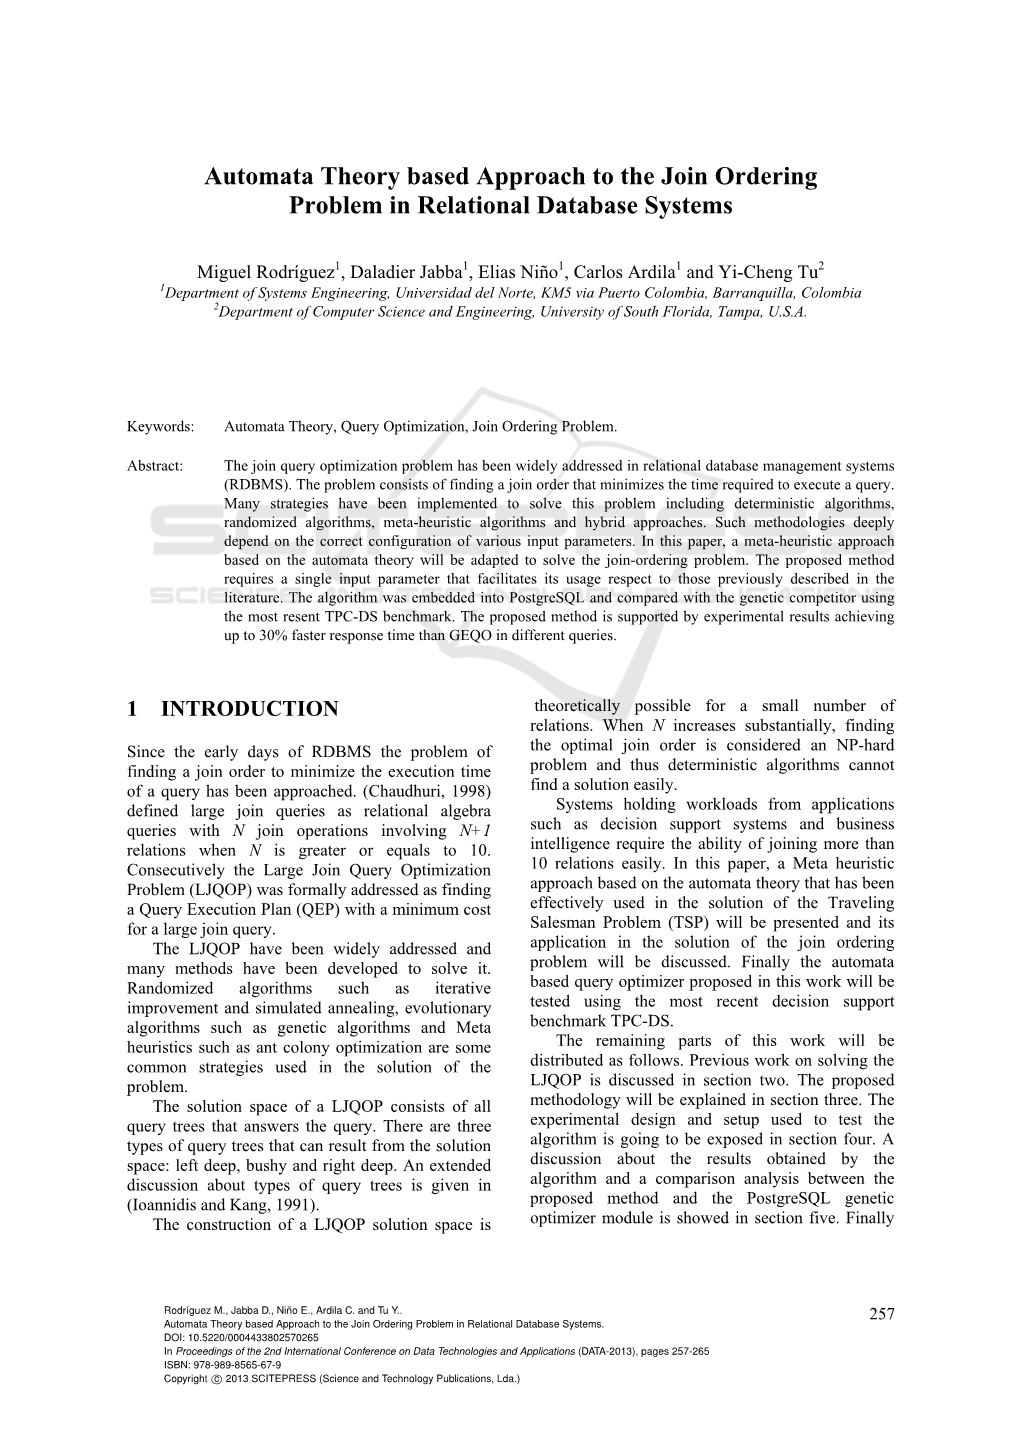 Automata Theory Based Approach to the Join Ordering Problem in Relational Database Systems